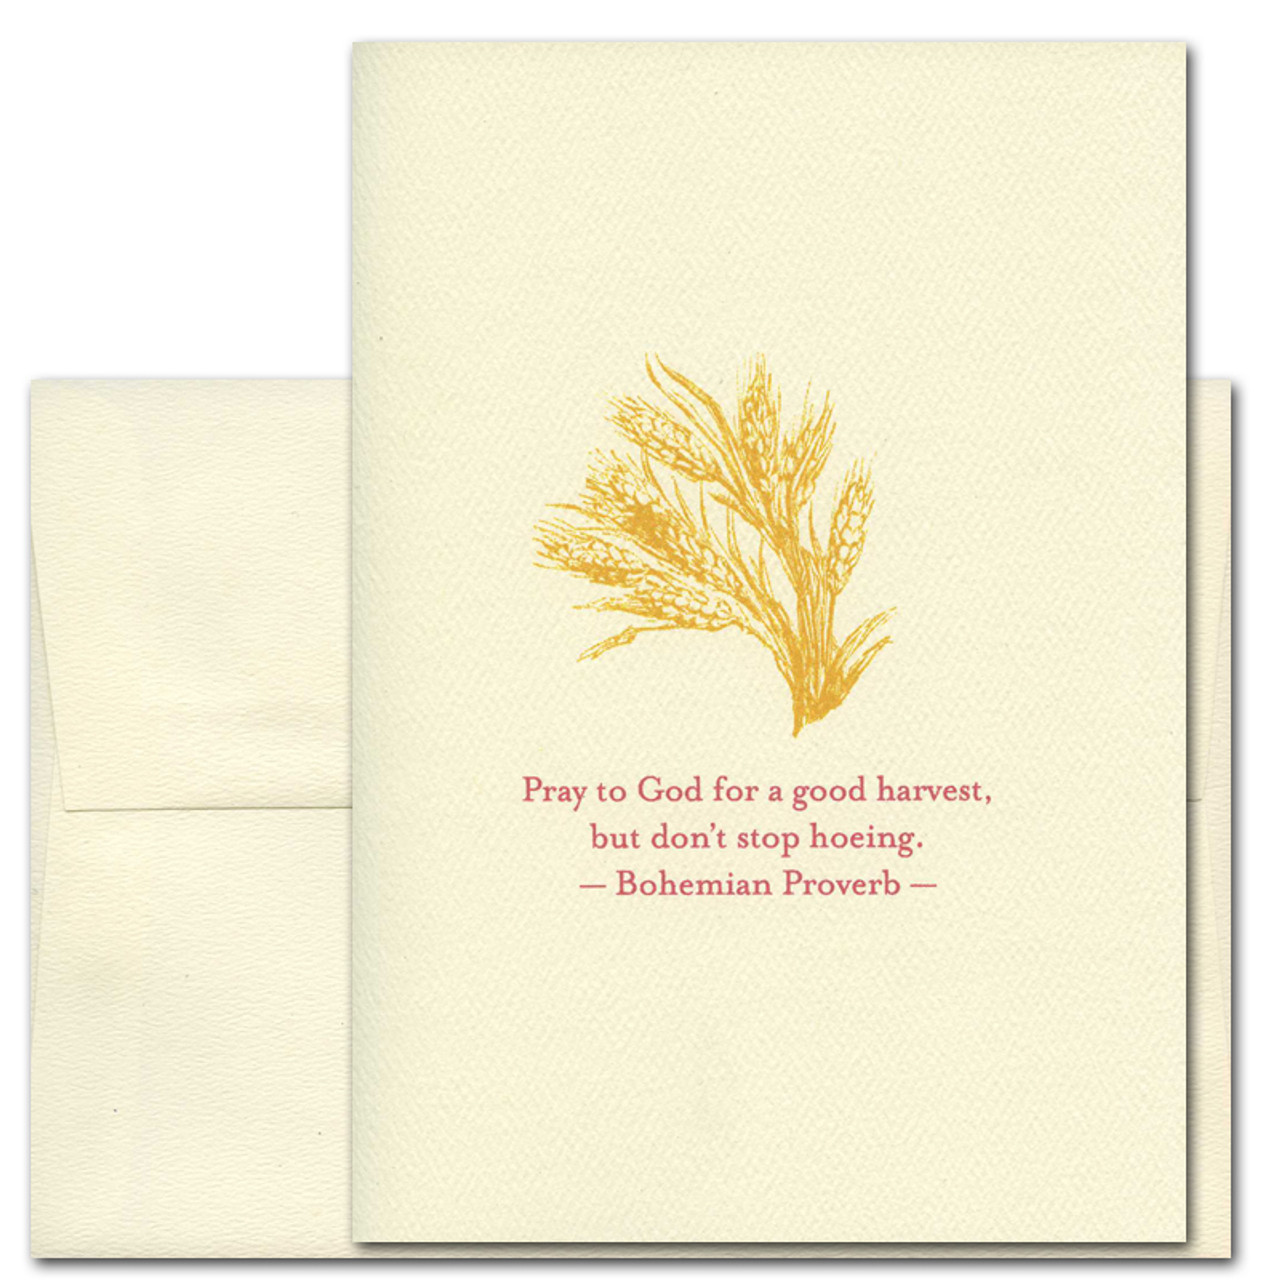 Quotation Card Good Harvest: Bohemian Proverb Cover shows golden vintage illustration of wheat blowing in the breeze with the Bohemian proverb: Pray to God for a good harvest, but don't stop hoeing.